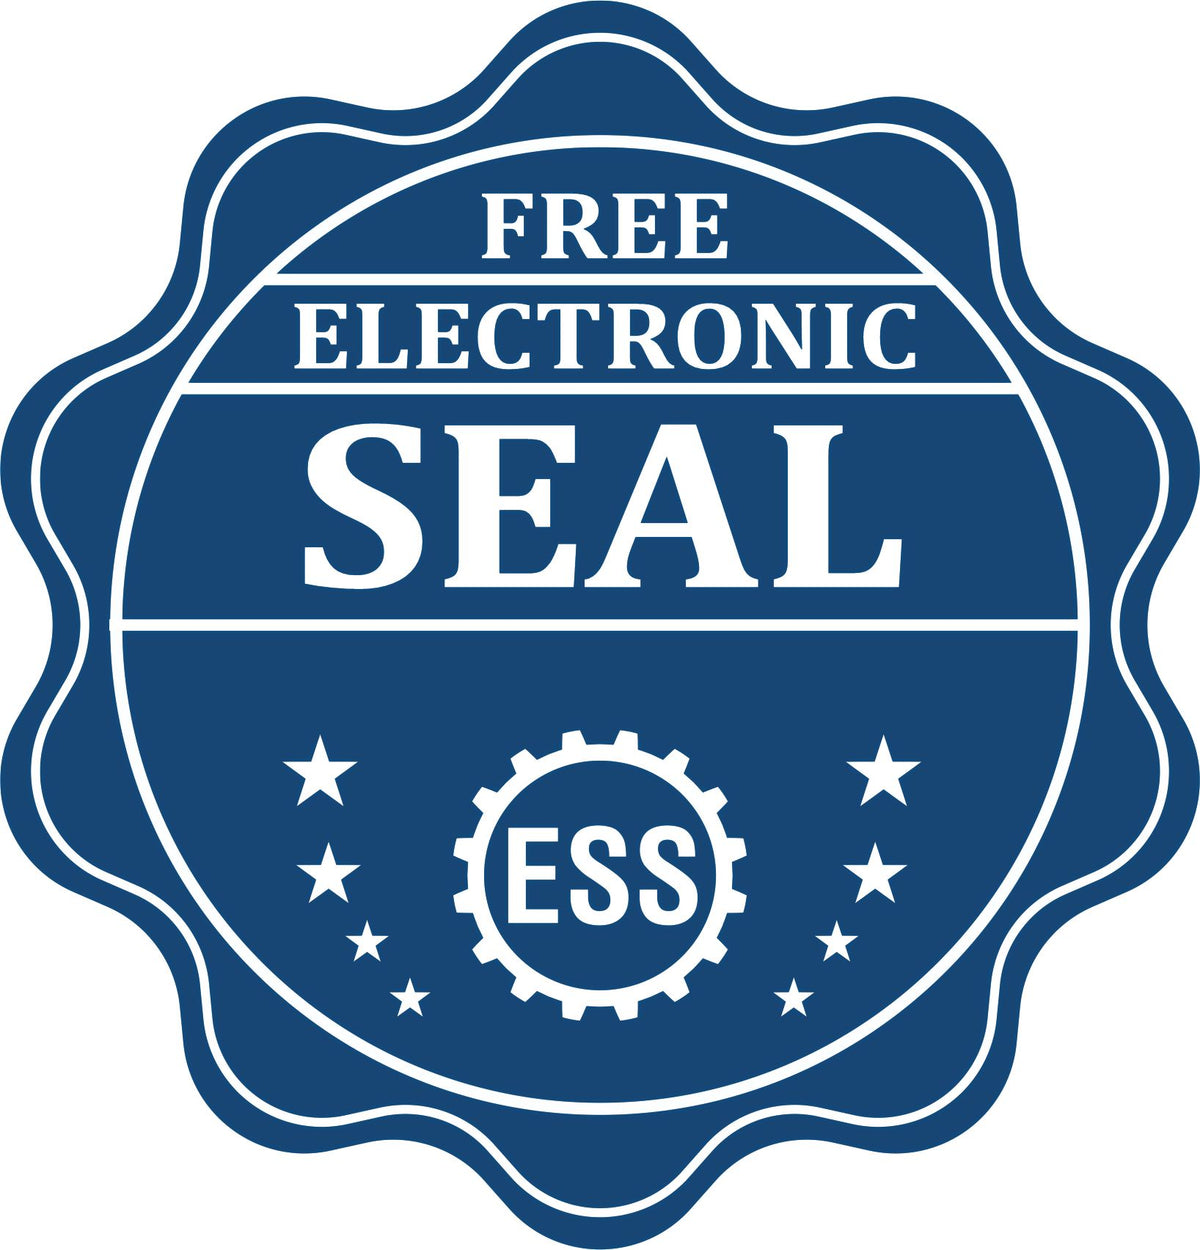 A badge showing a free electronic seal for the Hybrid Hawaii Engineer Seal with stars and the ESS gear on the emblem.